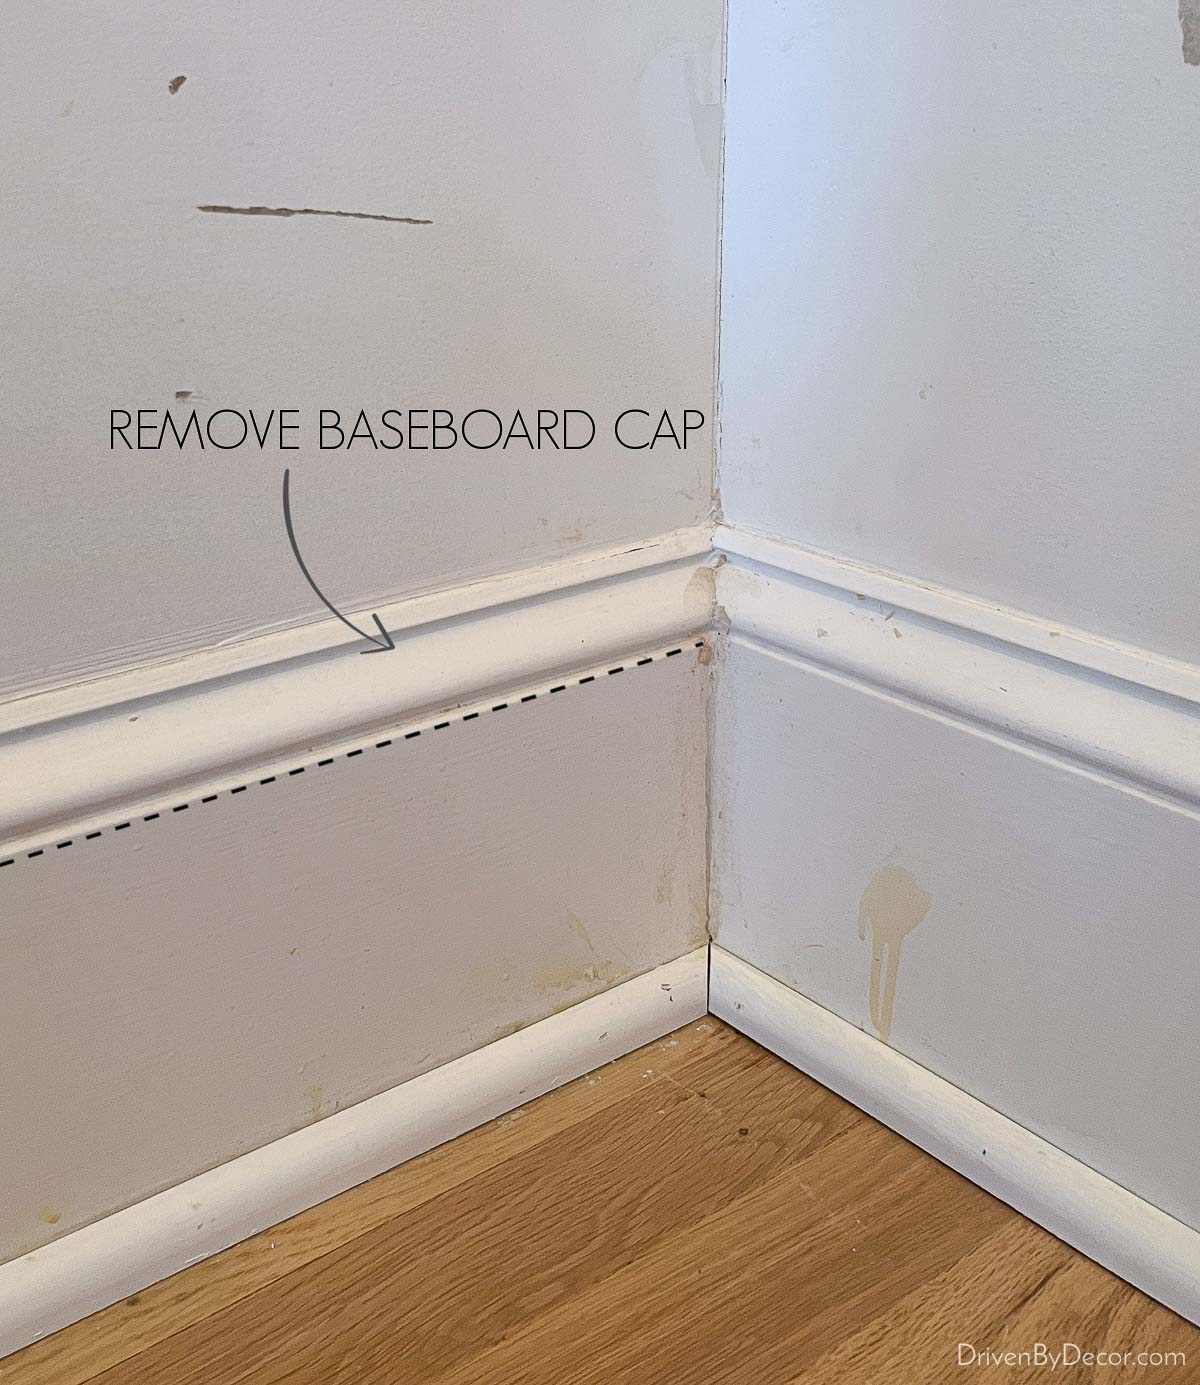 Cap on baseboards that was removed for shiplap installation